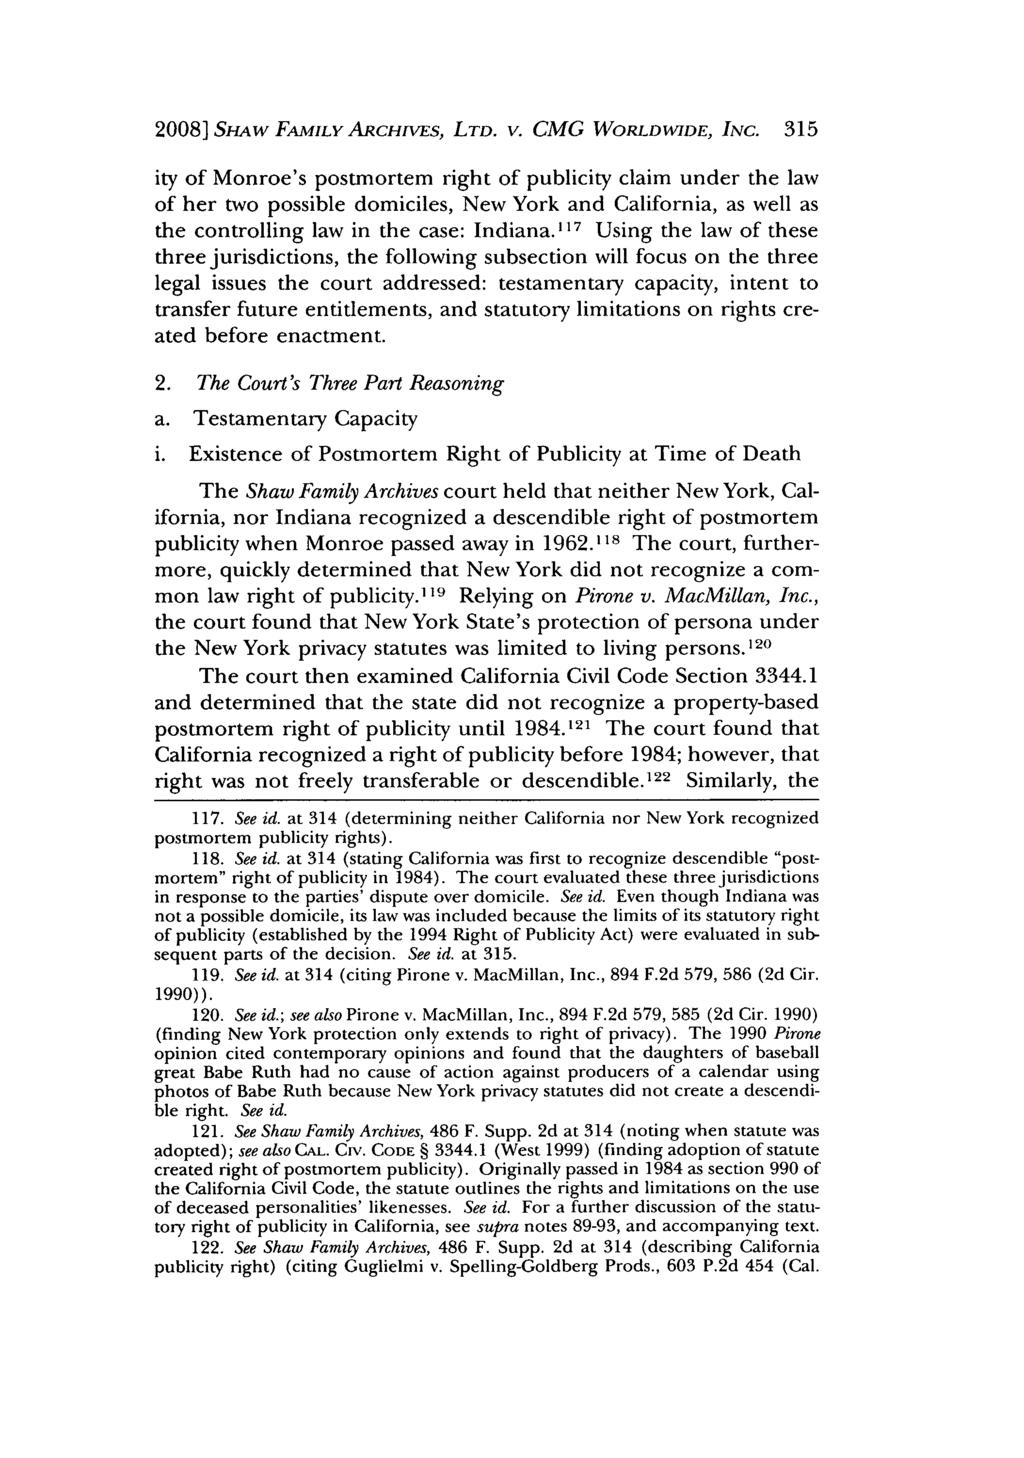 Fuller: Like a Candle in the Wind: Shaw Family Archives, LTD. v. CMG Worl 2008] SHAw FAMILY ARCHIVES, LTD. V. CMG WORLDWIDE, INC.